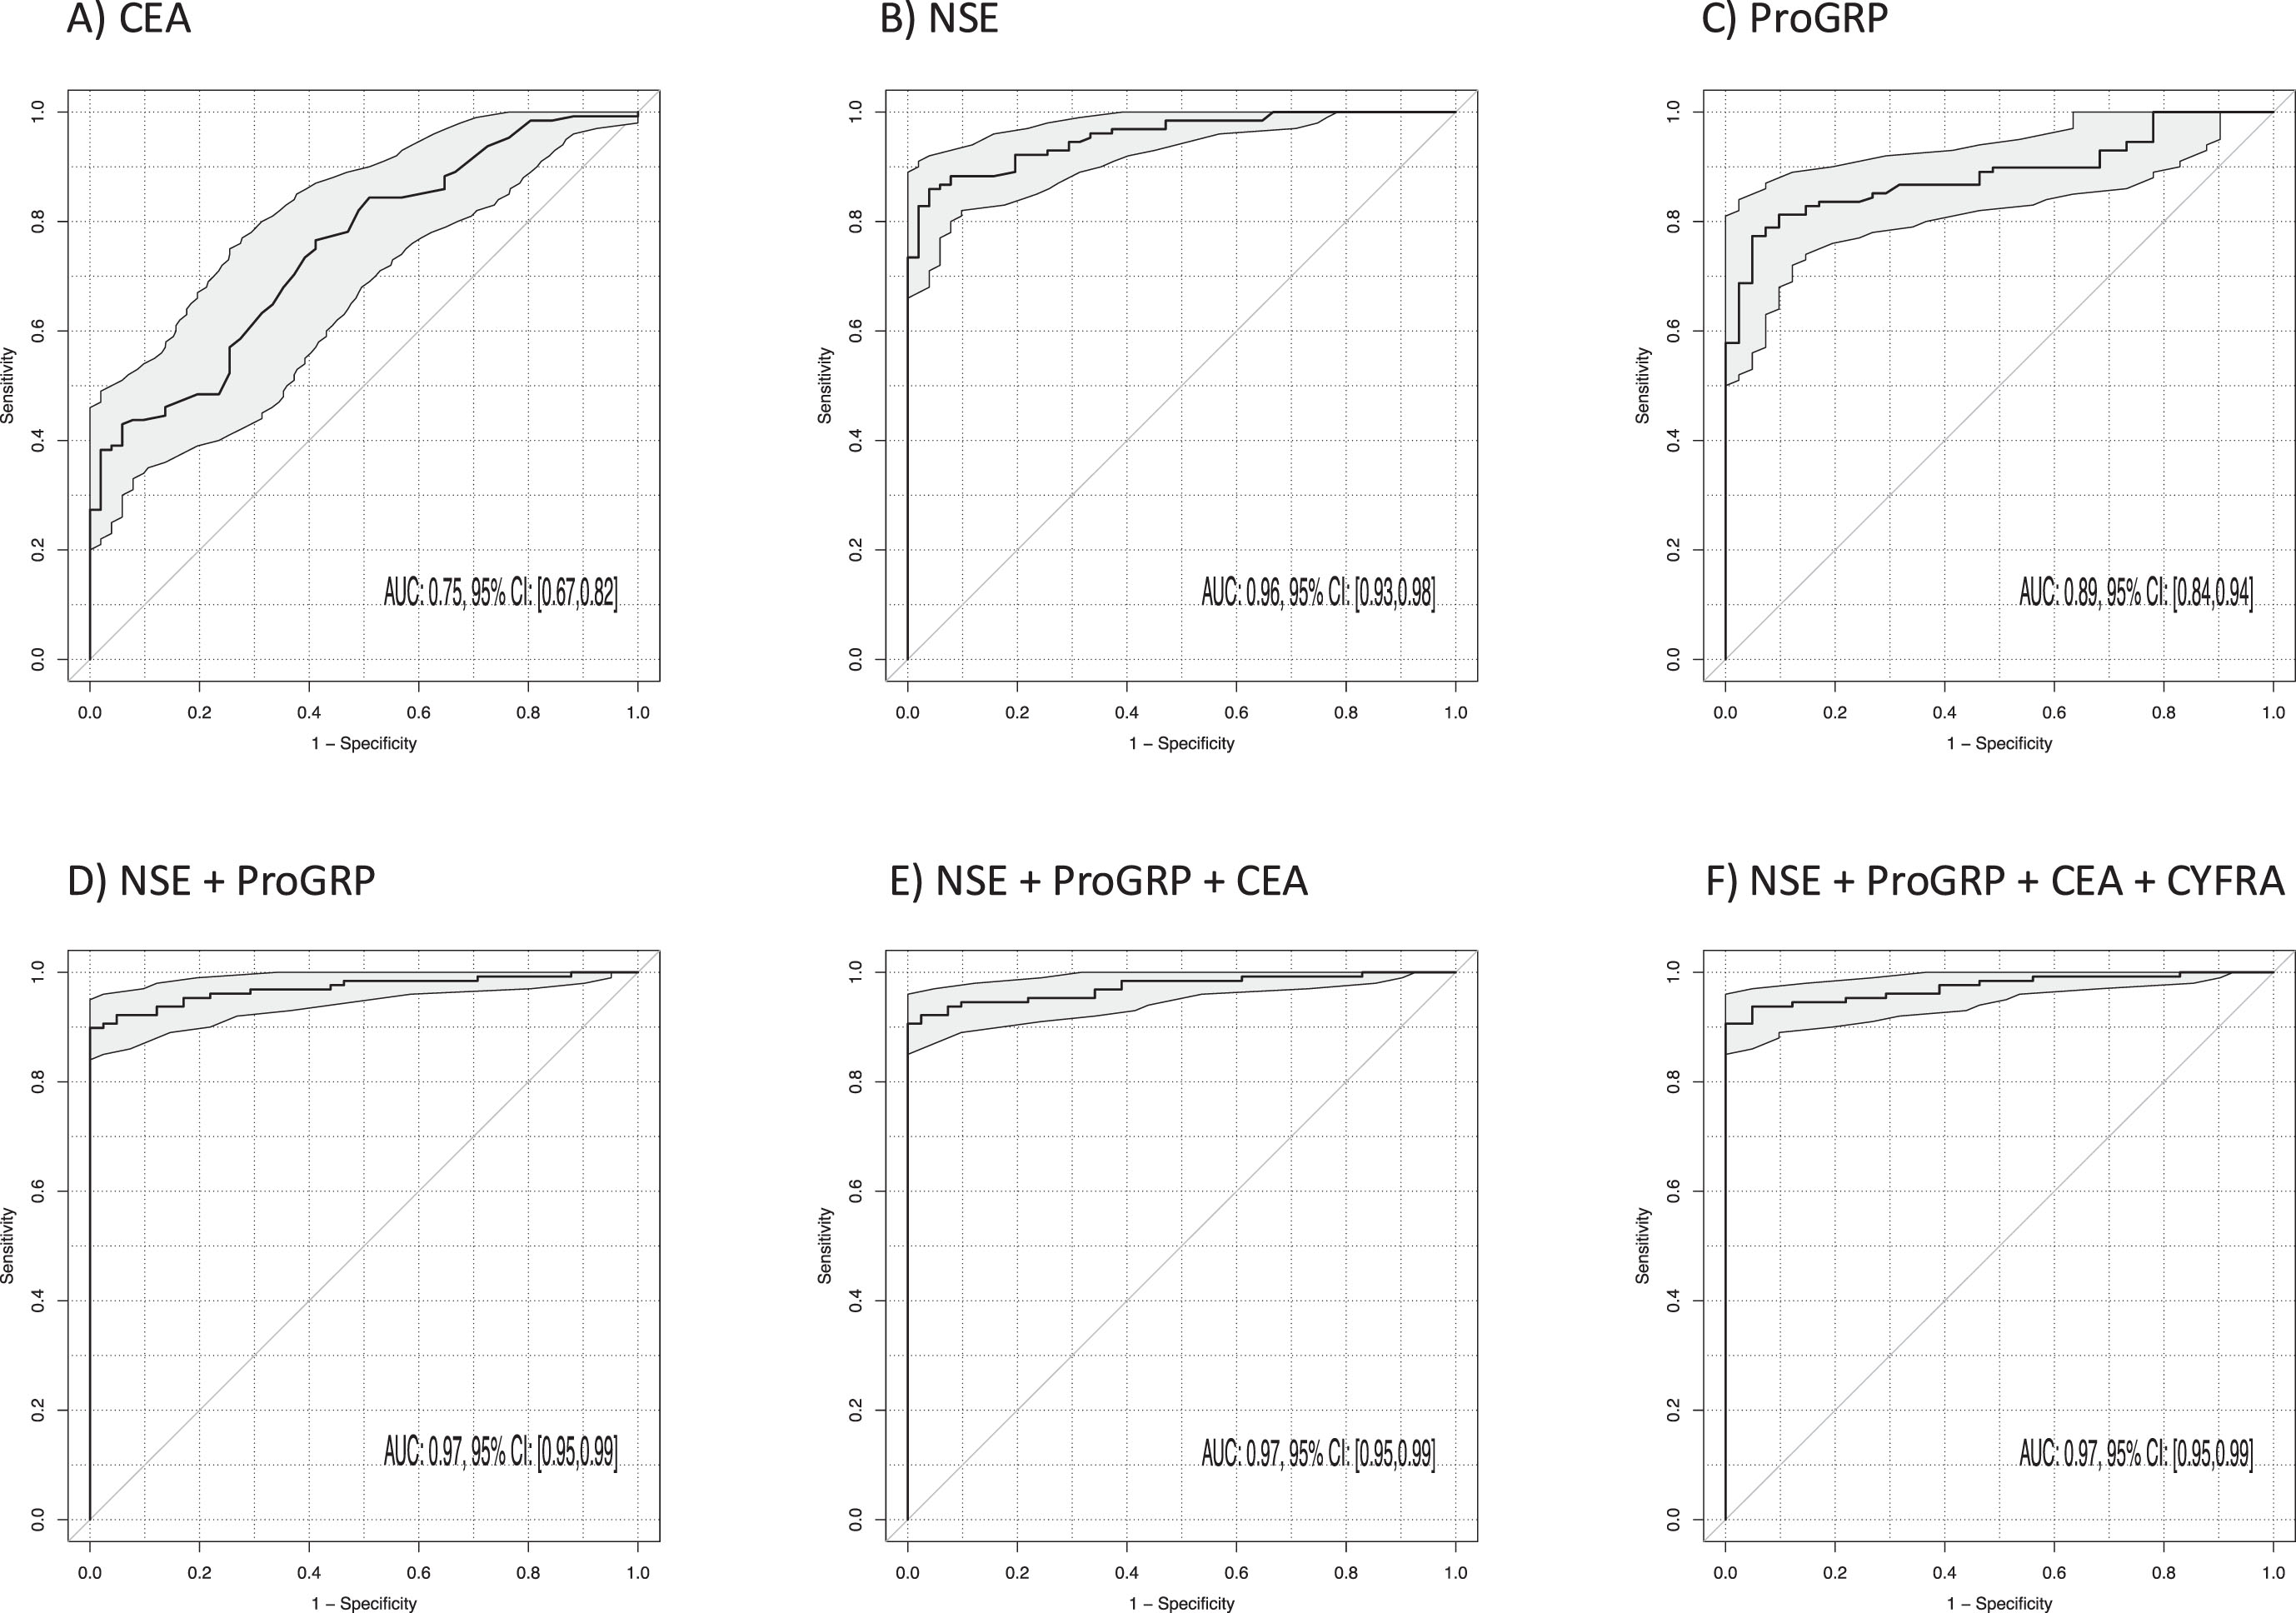 Power of discrimination between patients with small cell lung cancer (SCLC) and benign lung diseases (BLD) by use of single tumor markers and combinations illustrated by receiver operating characteristic (ROC) curves with areas under the curves (AUCs) and respective 95% confidence intervals (95% CI).